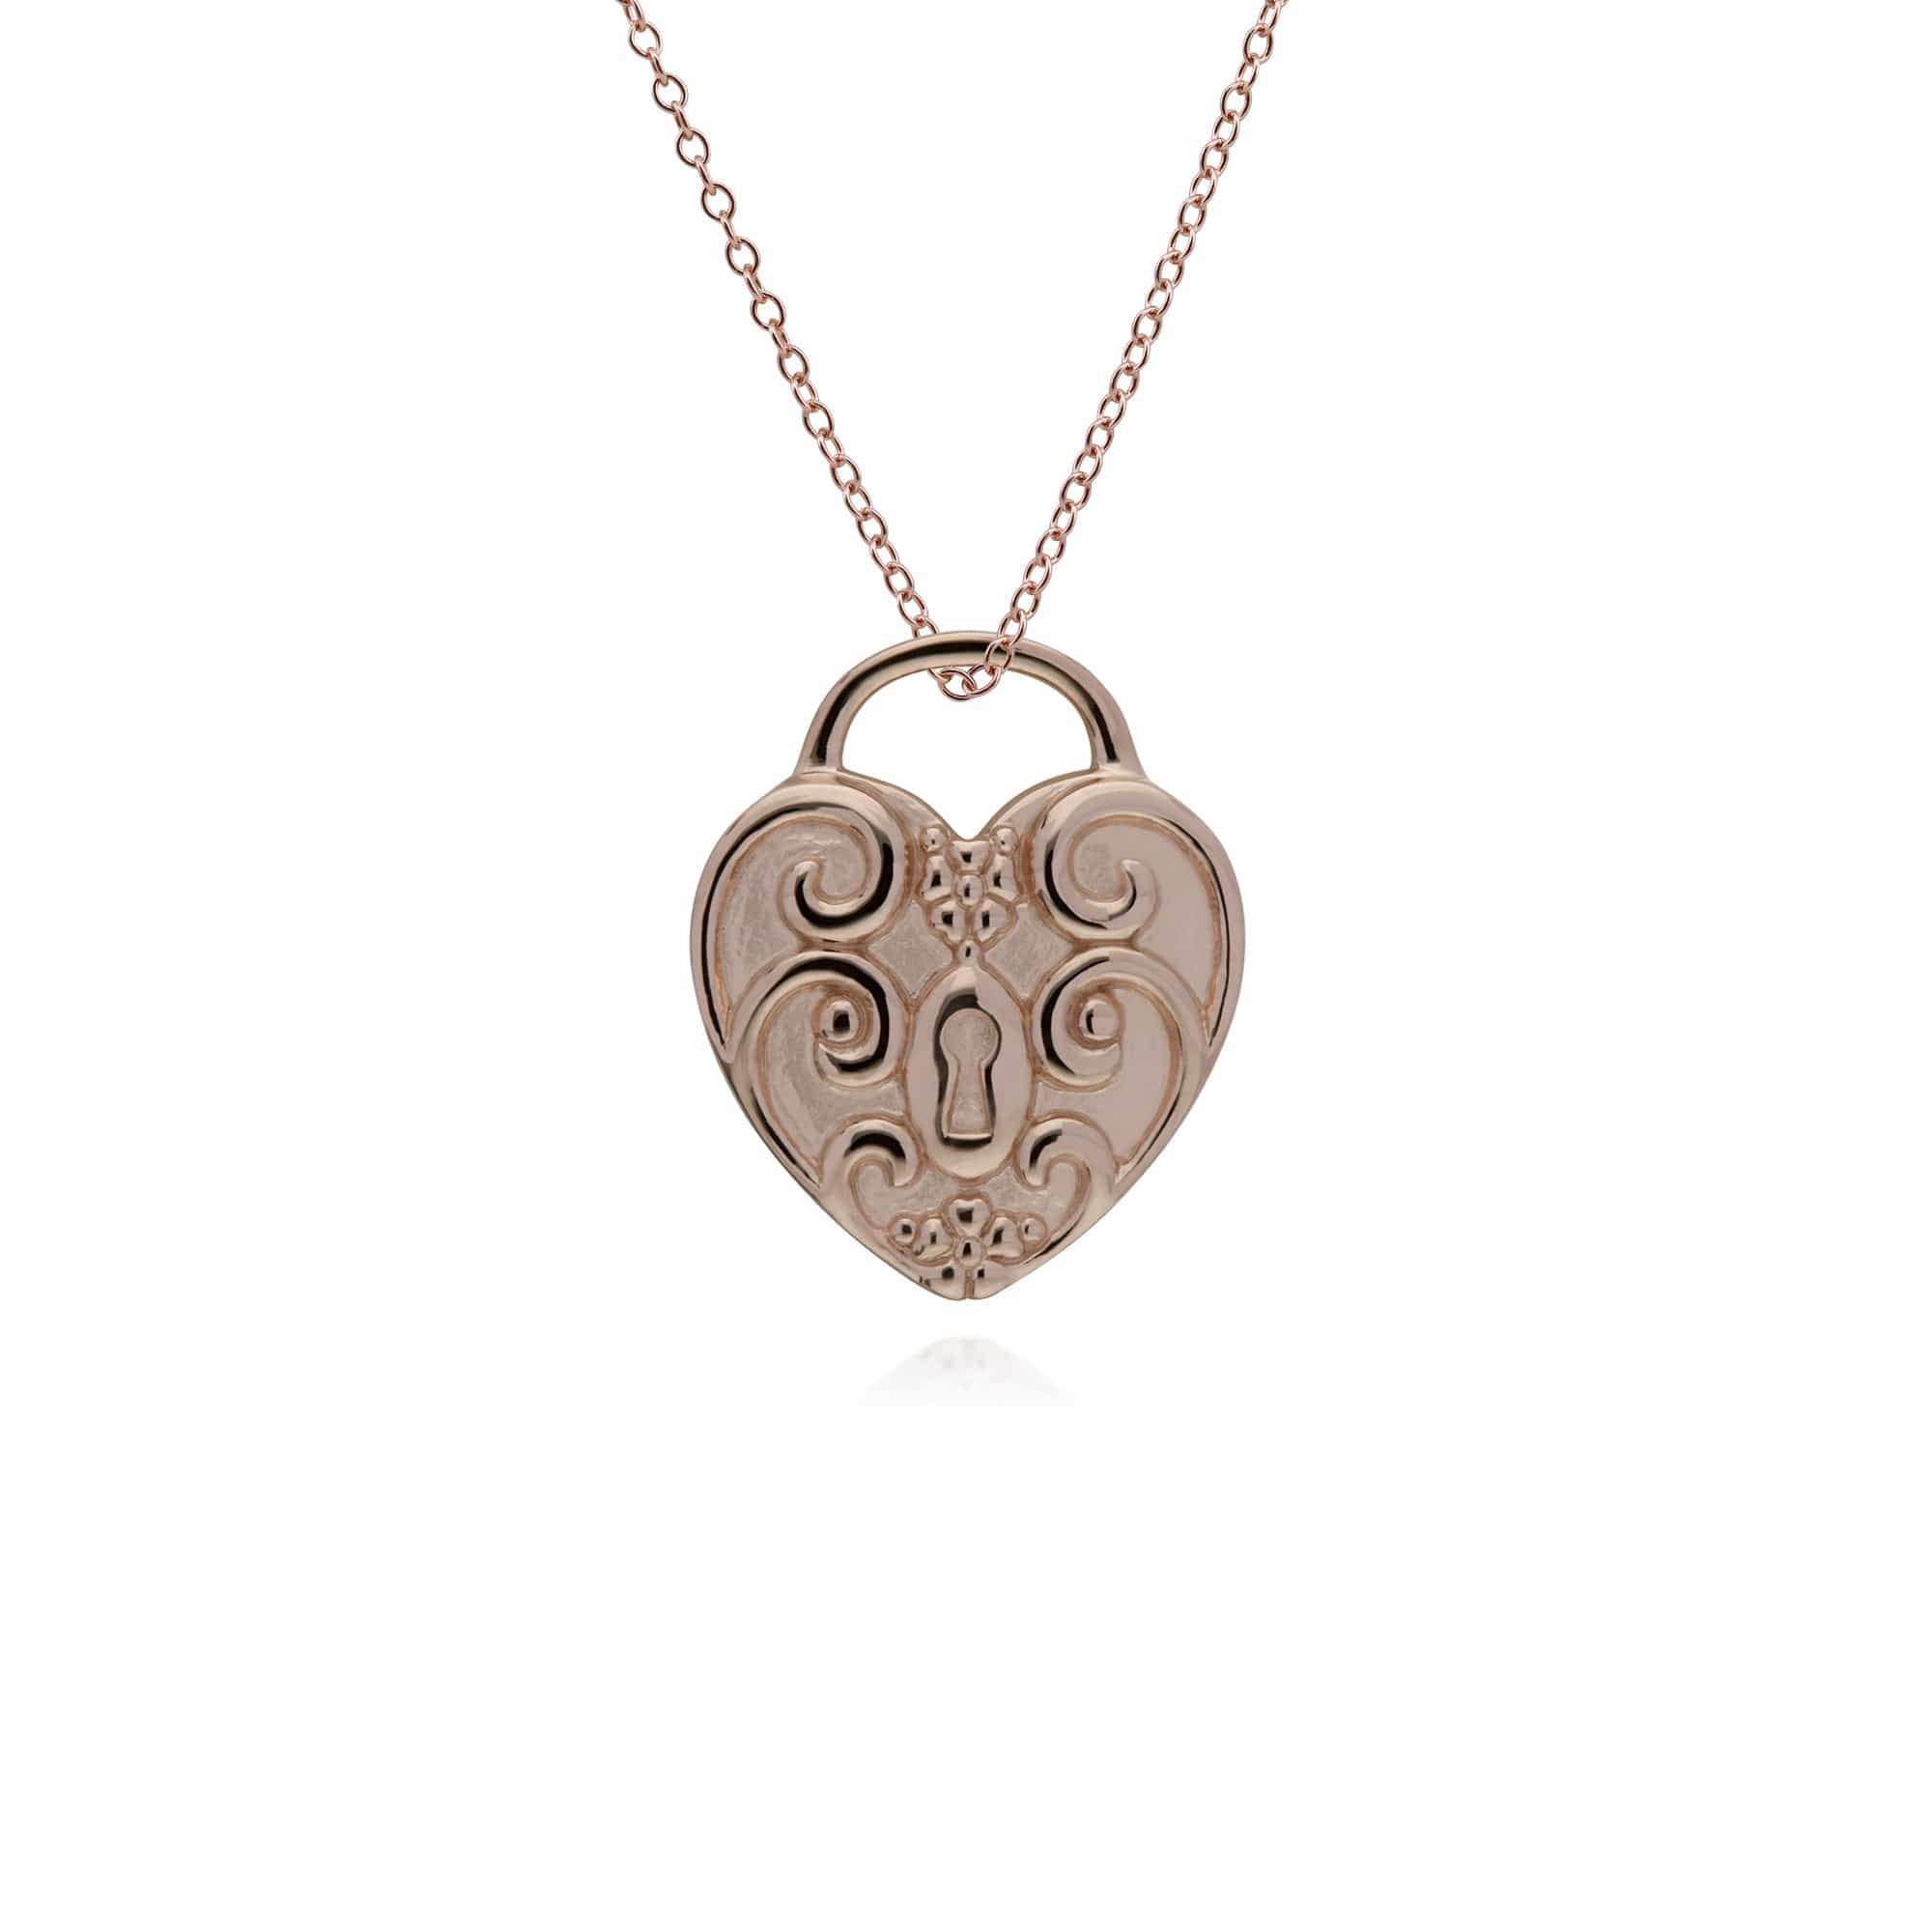 270P027302925-270P026501925 Classic Swirl Heart Lock Pendant & Emerald Charm in Rose Gold Plated 925 Sterling Silver 3